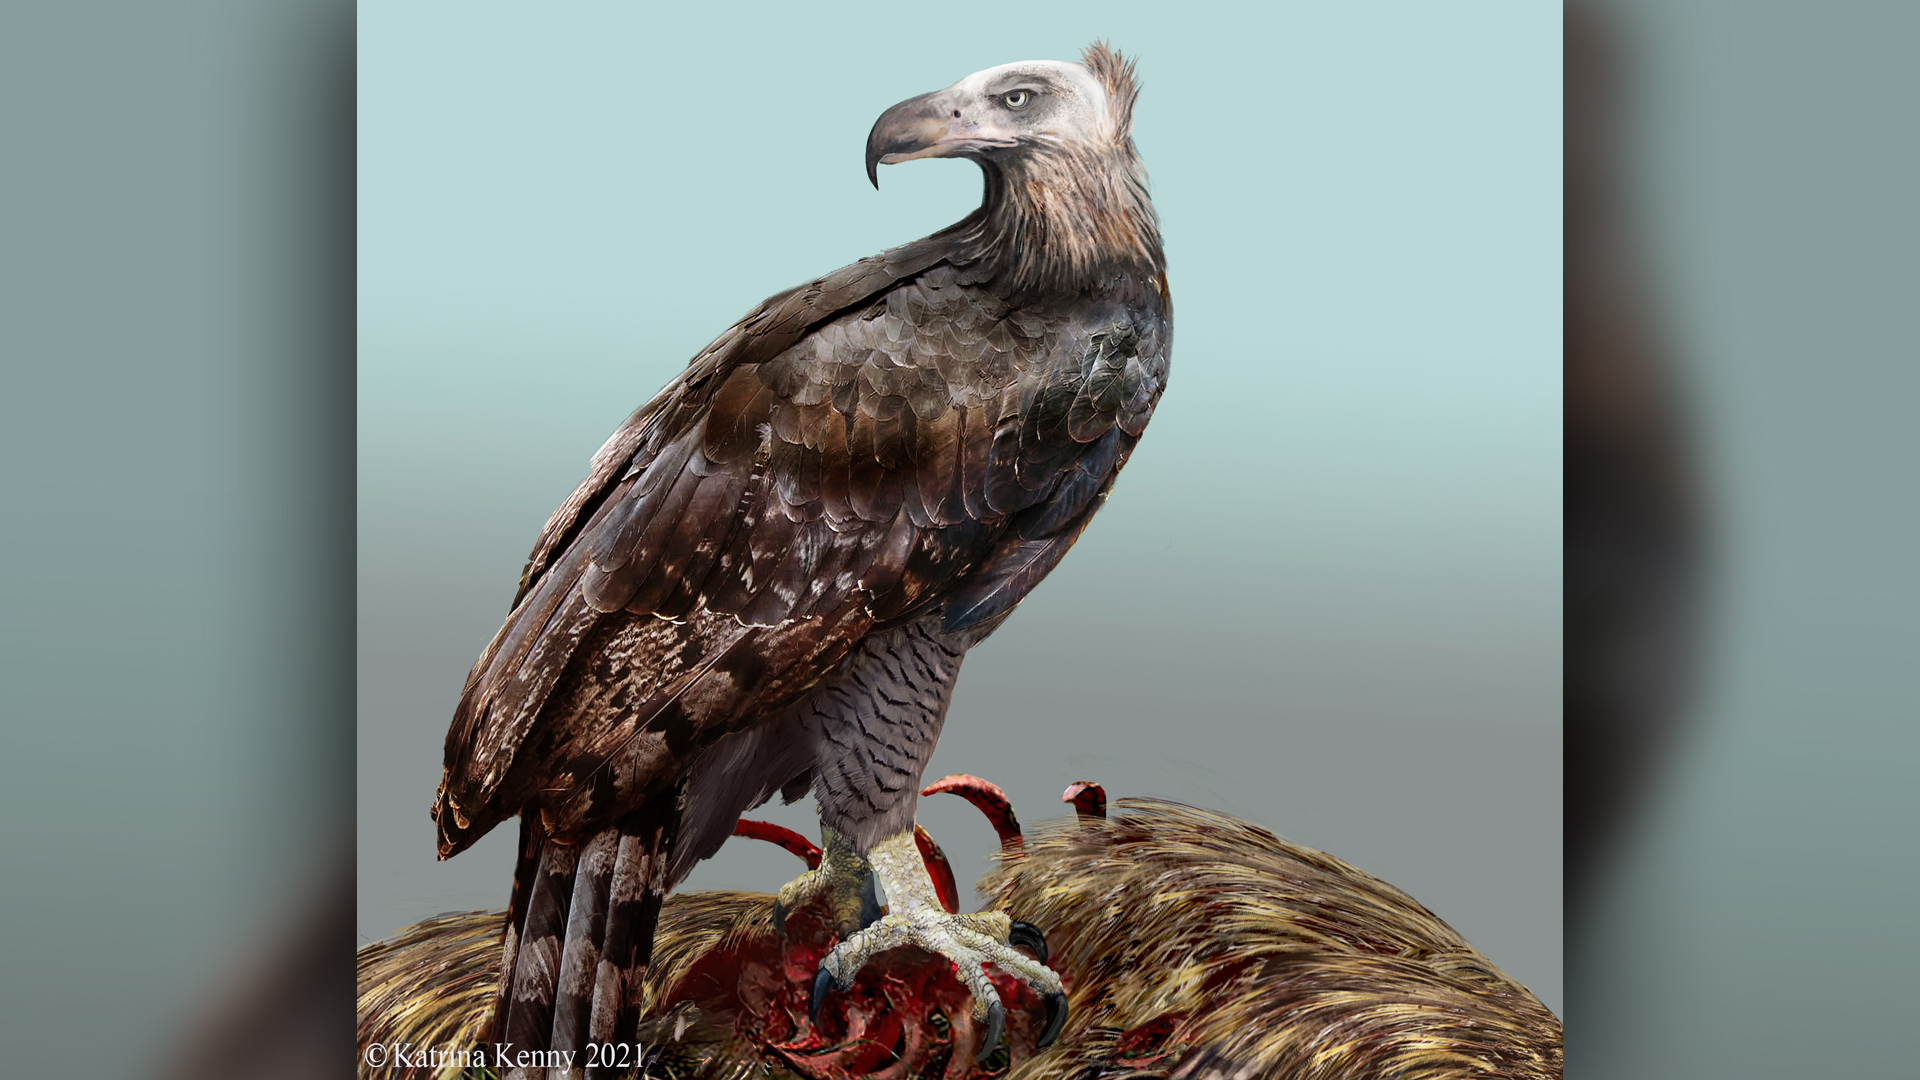 Biggest eagle to ever live plunged headfirst into dead prey to eat the  organs | Live Science